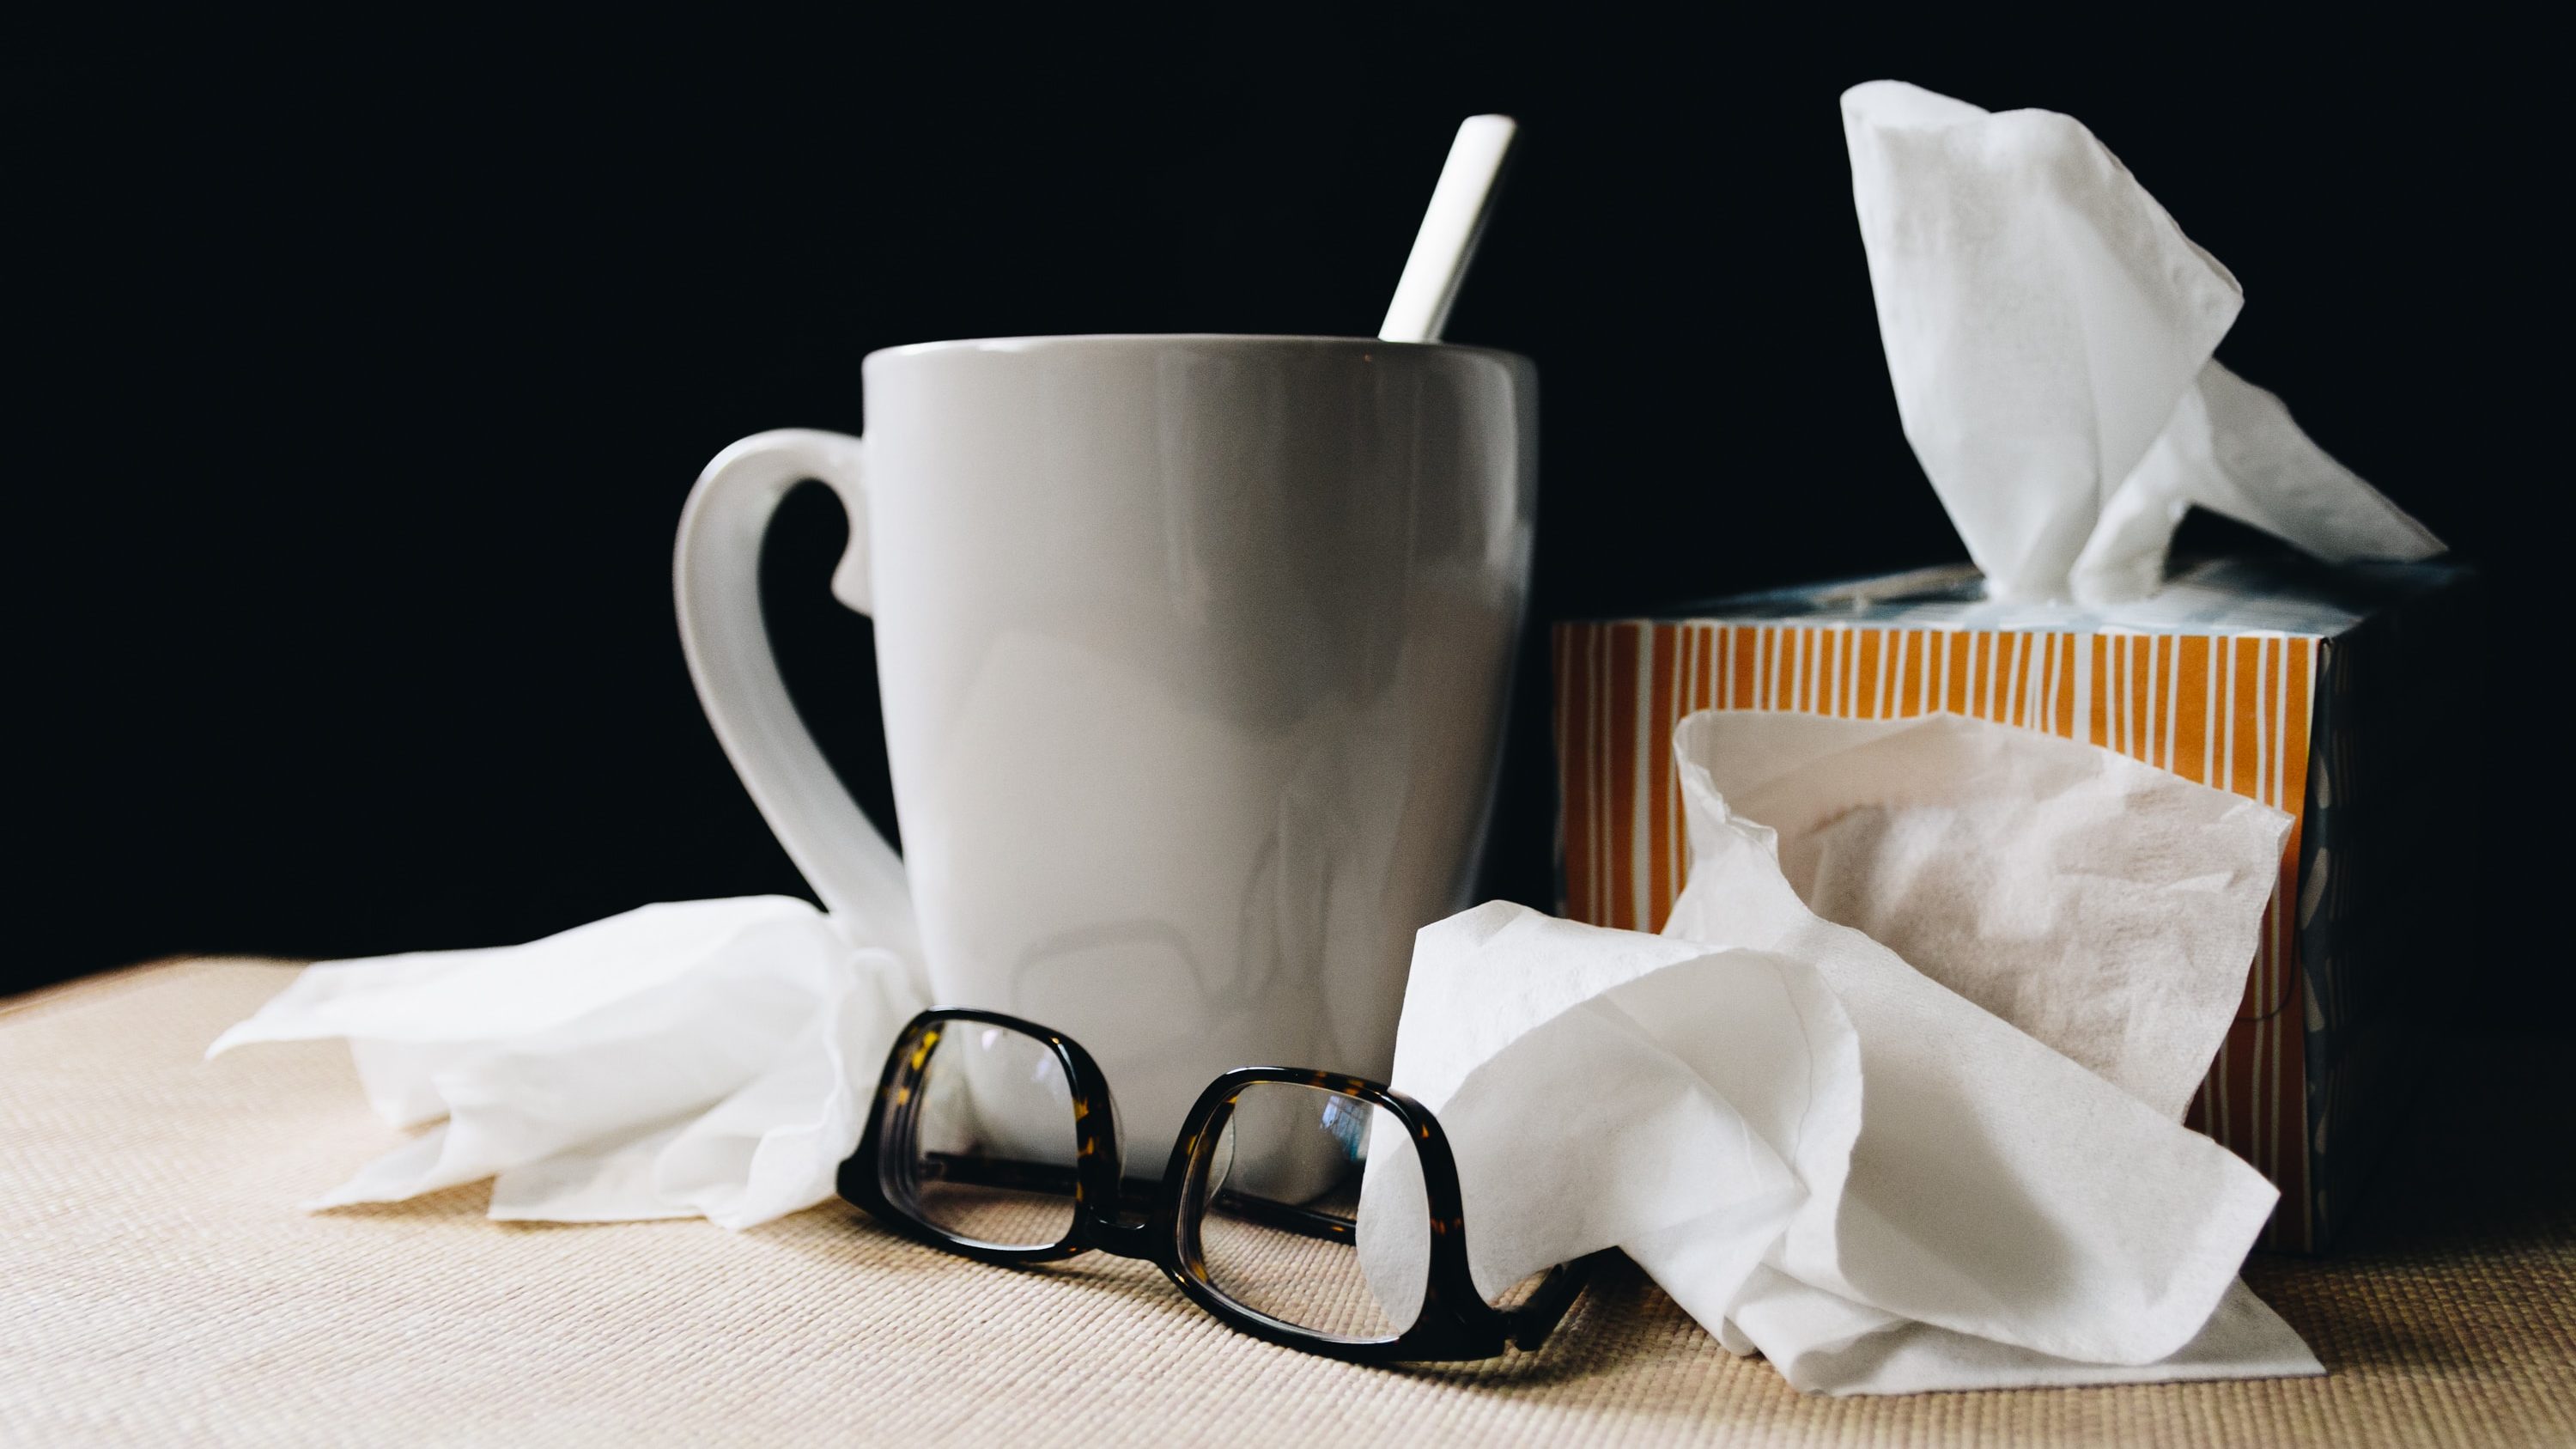 NICD reports increase in Western Cape influenza cases